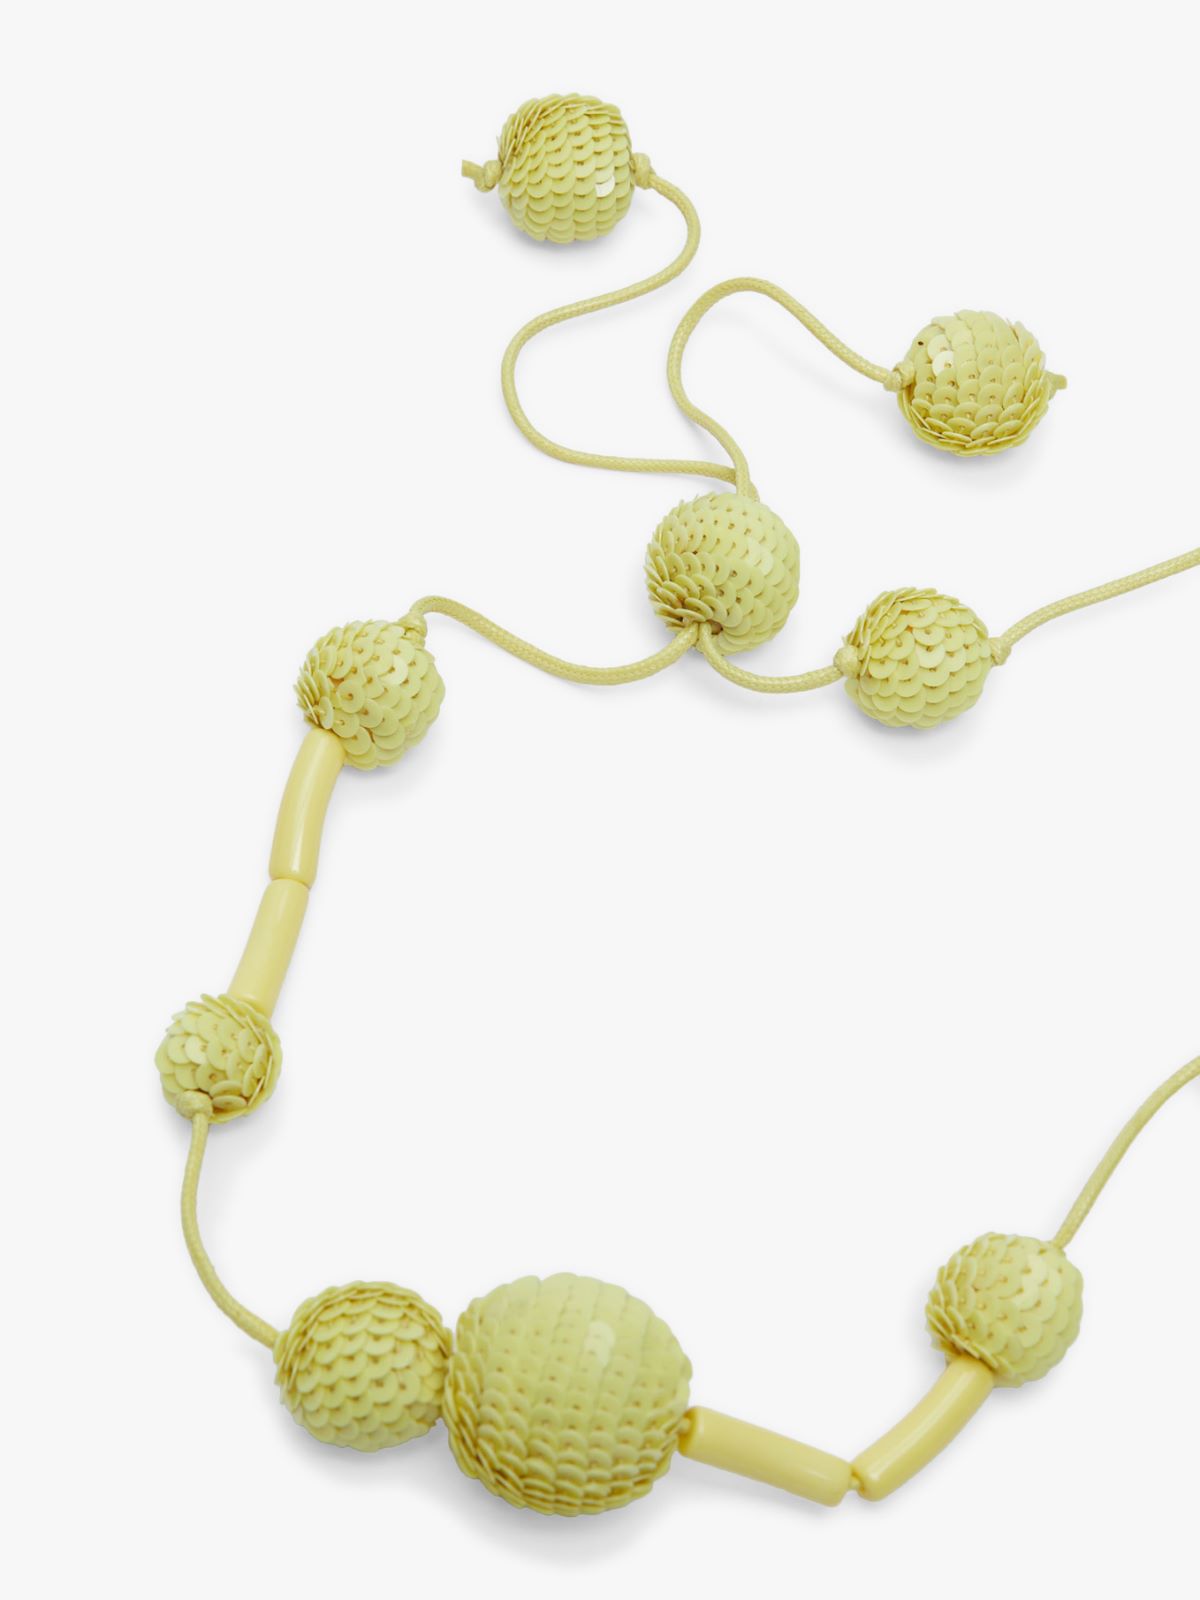 Resin and cotton necklace - YELLOW - Weekend Max Mara - 2